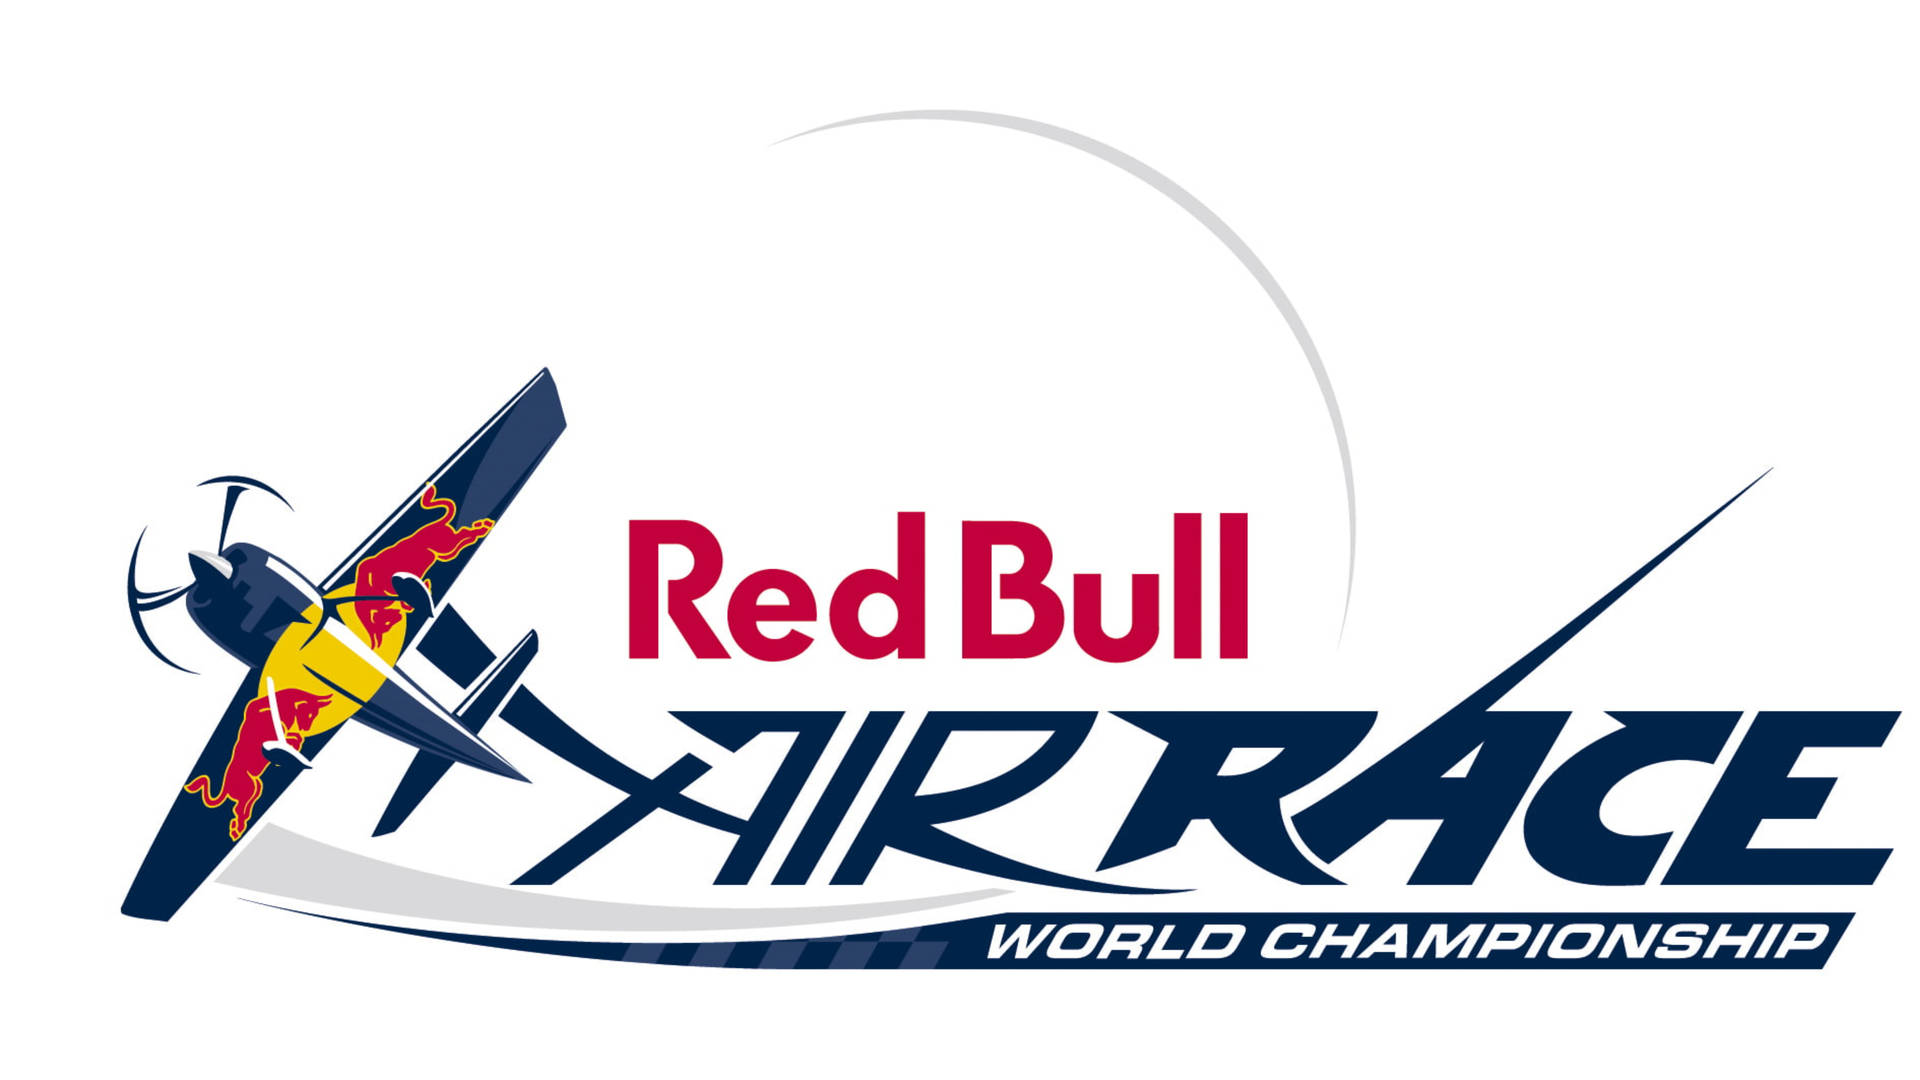 Red Bull 5120X2880 Wallpaper and Background Image